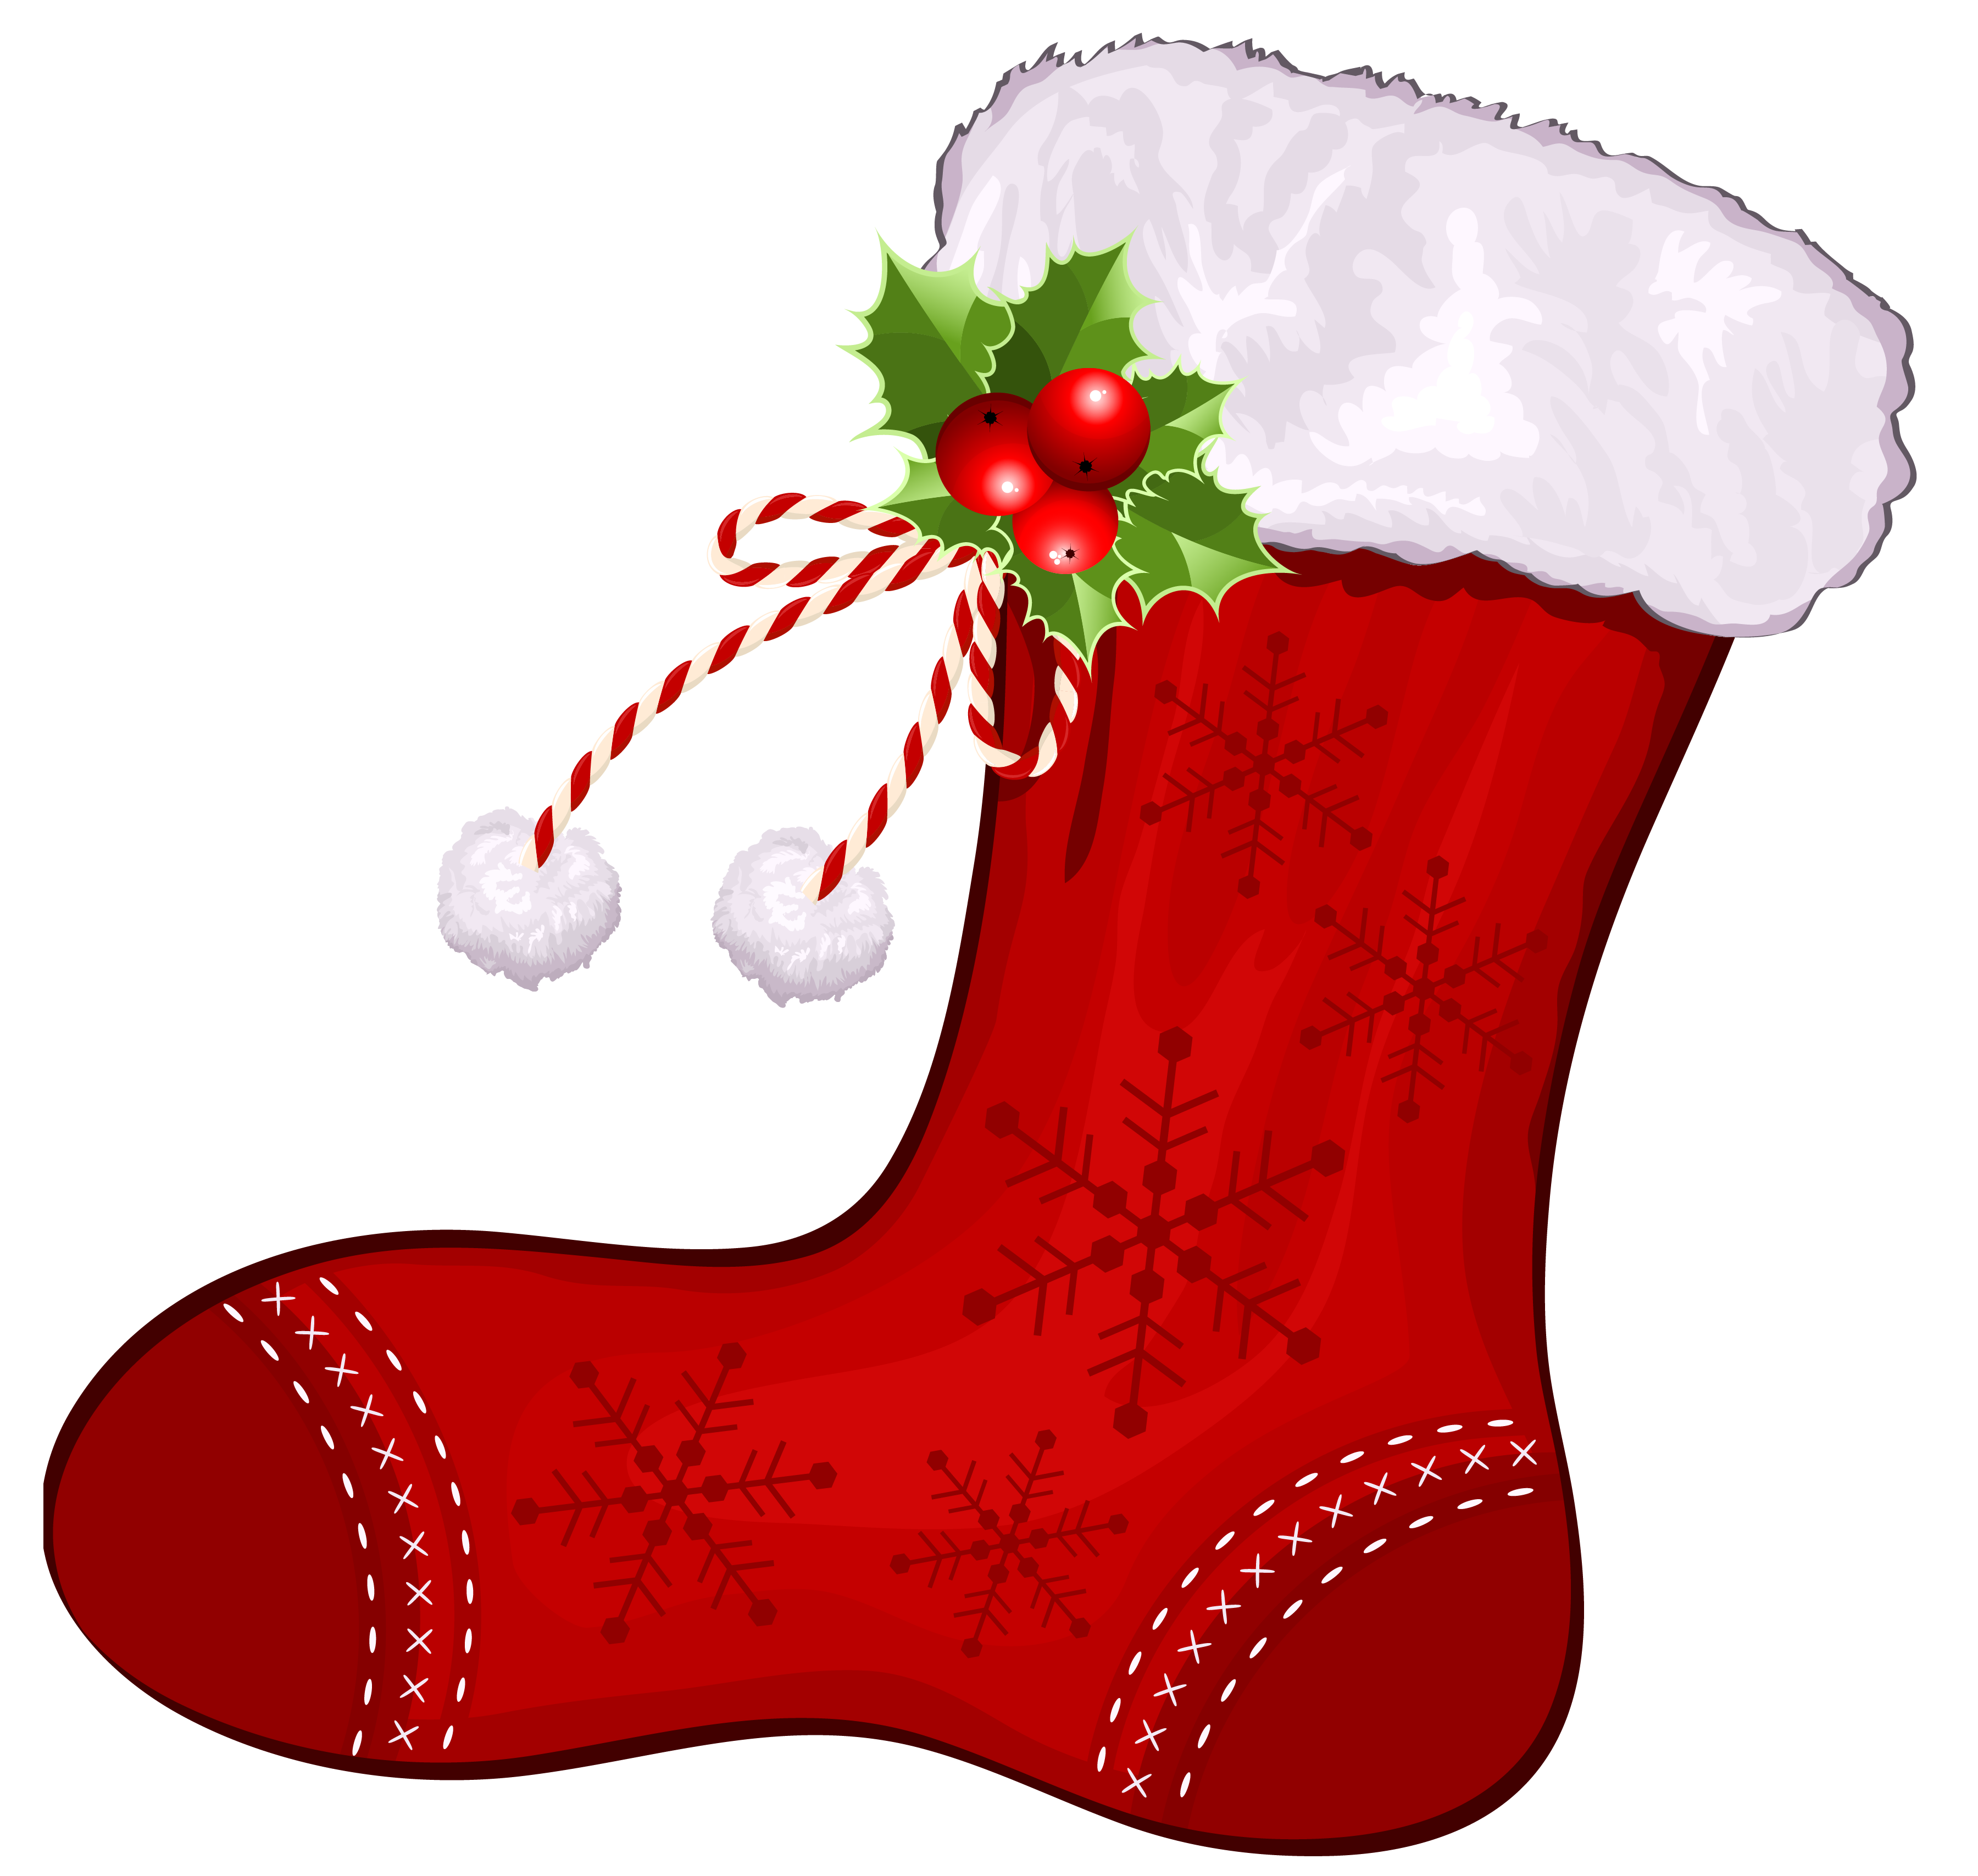 Christmas Stocking Clipart. Stocking cliparts